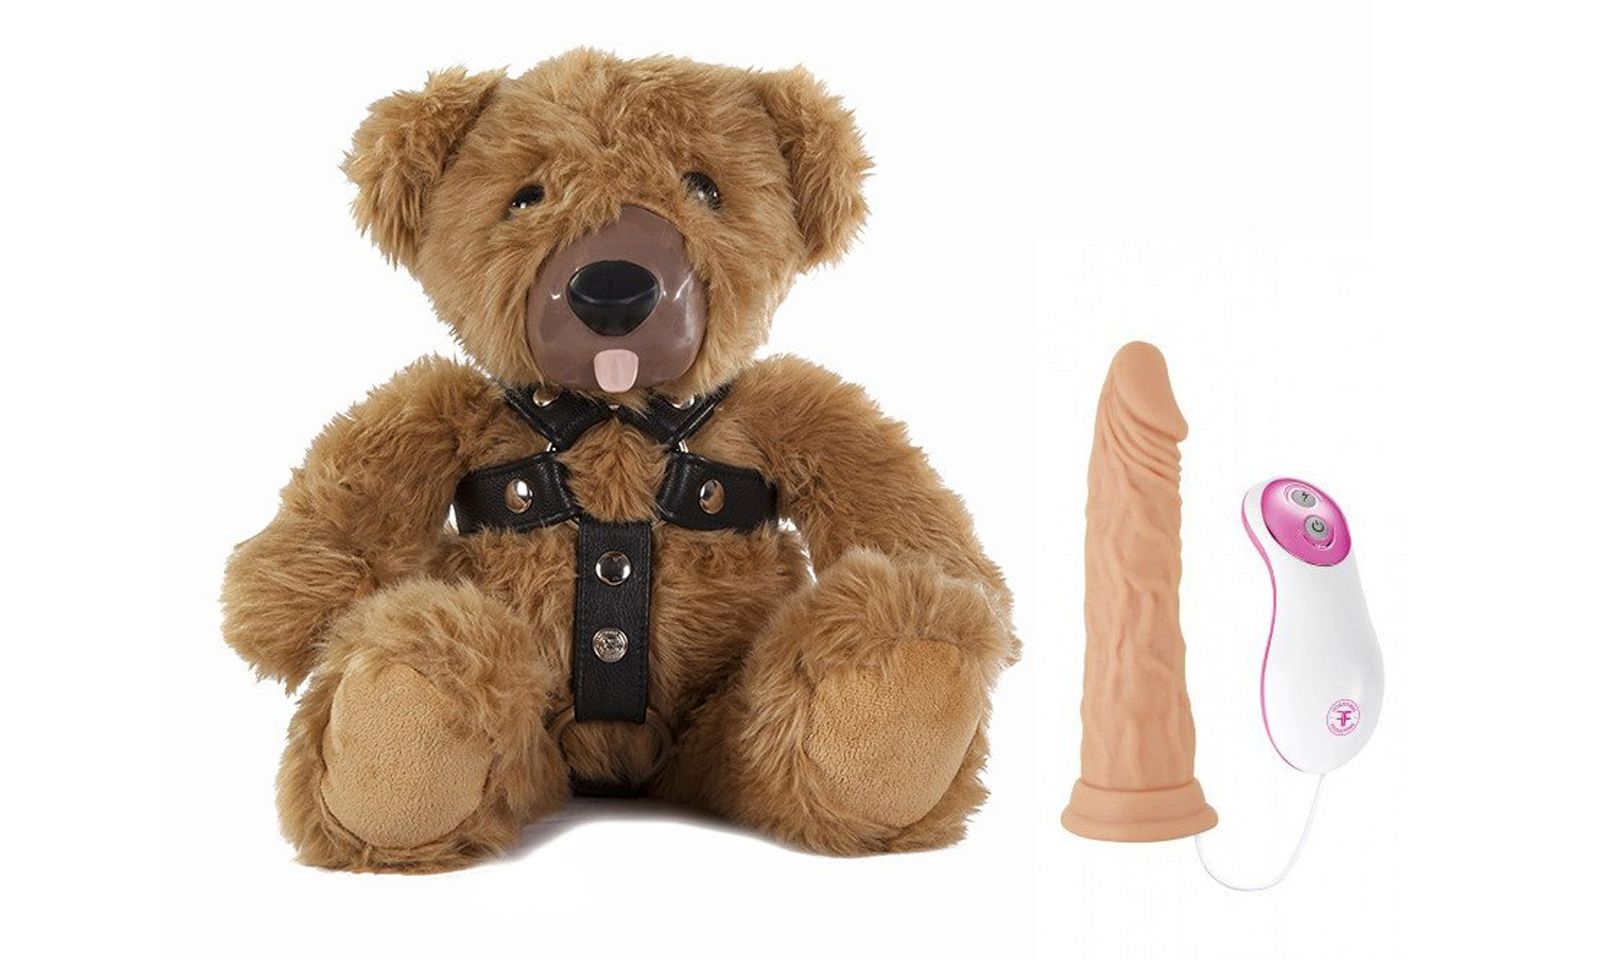 diane france sergeant recommends sex with teddy bear pic